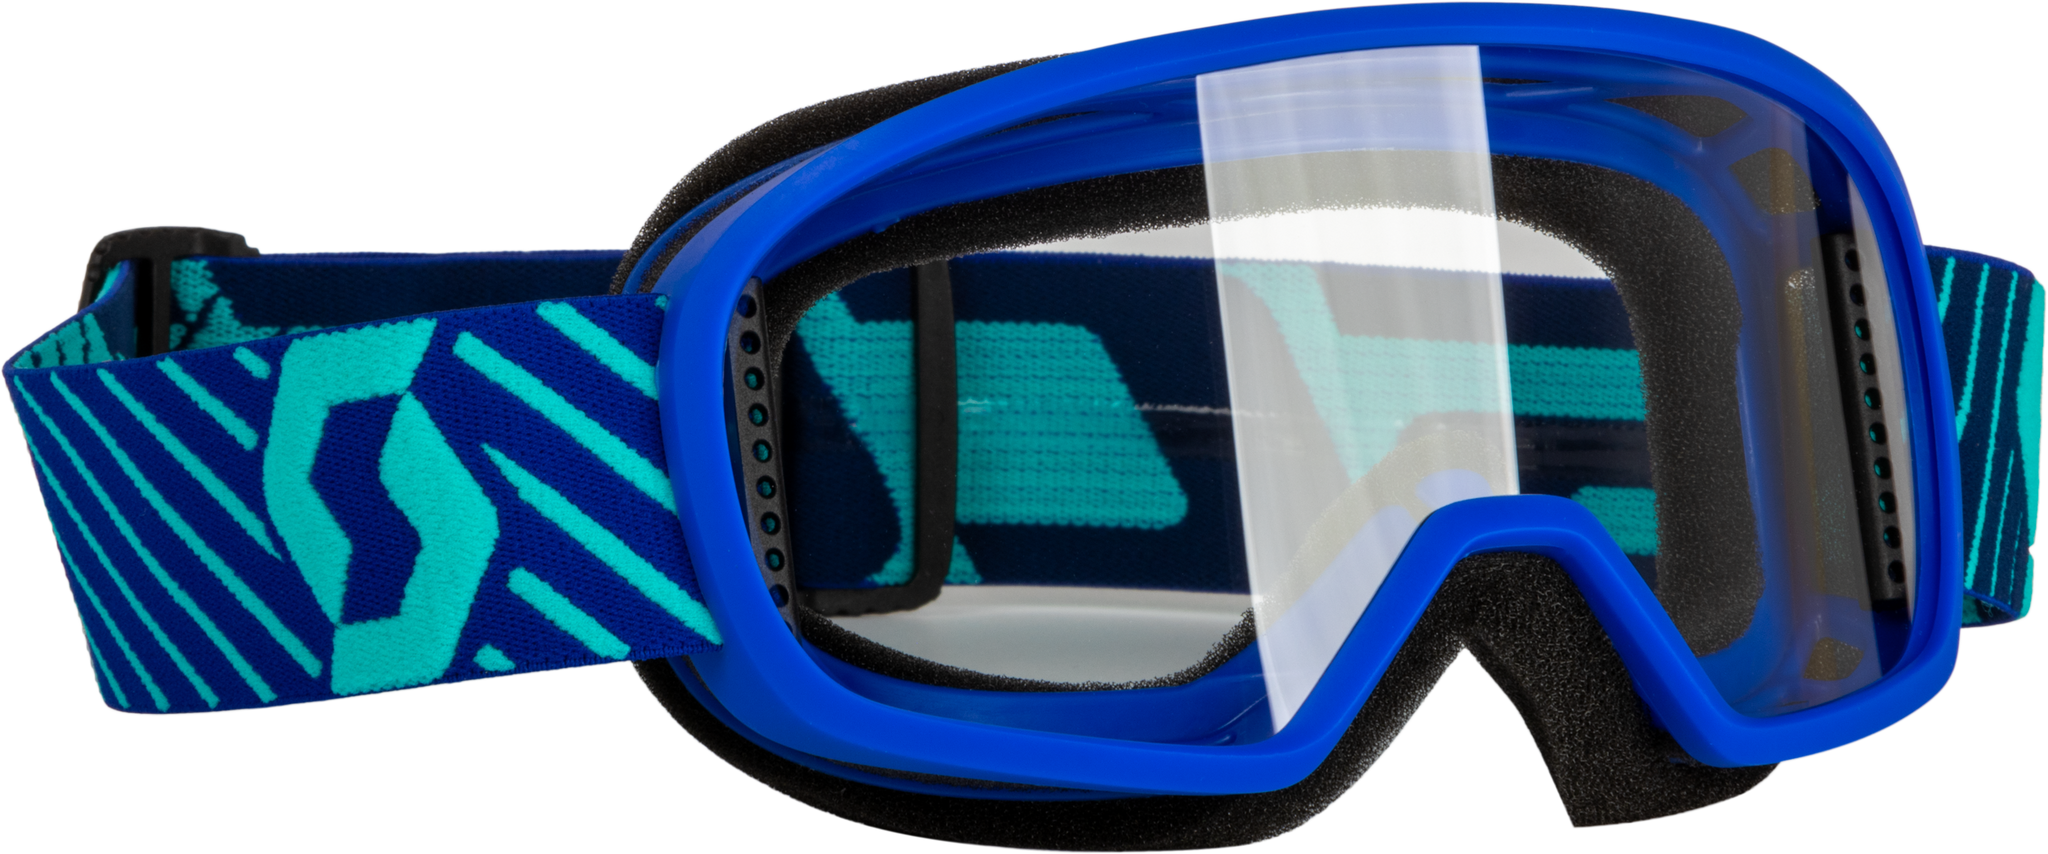 Youth Buzz Mx Goggle Blue/Teal Blue W/Clear